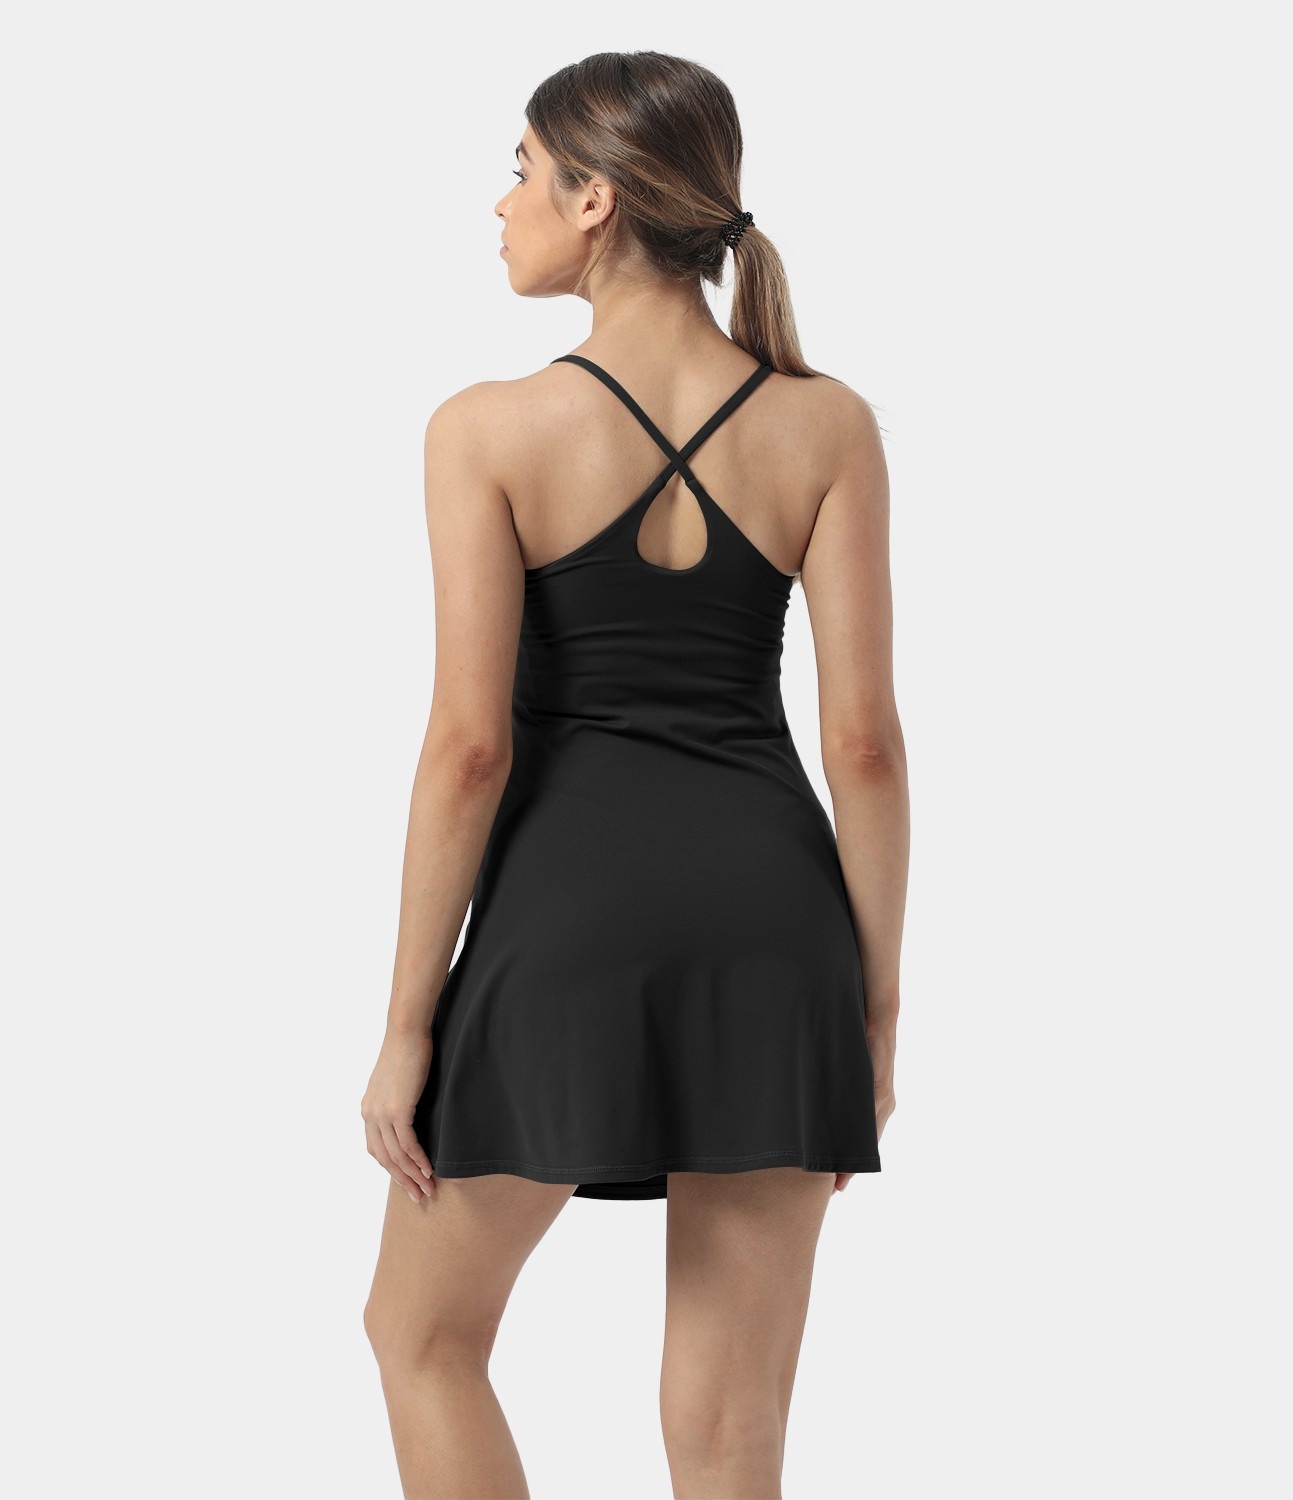 Is the Halara dress worth it? We tried the viral 'workout dress